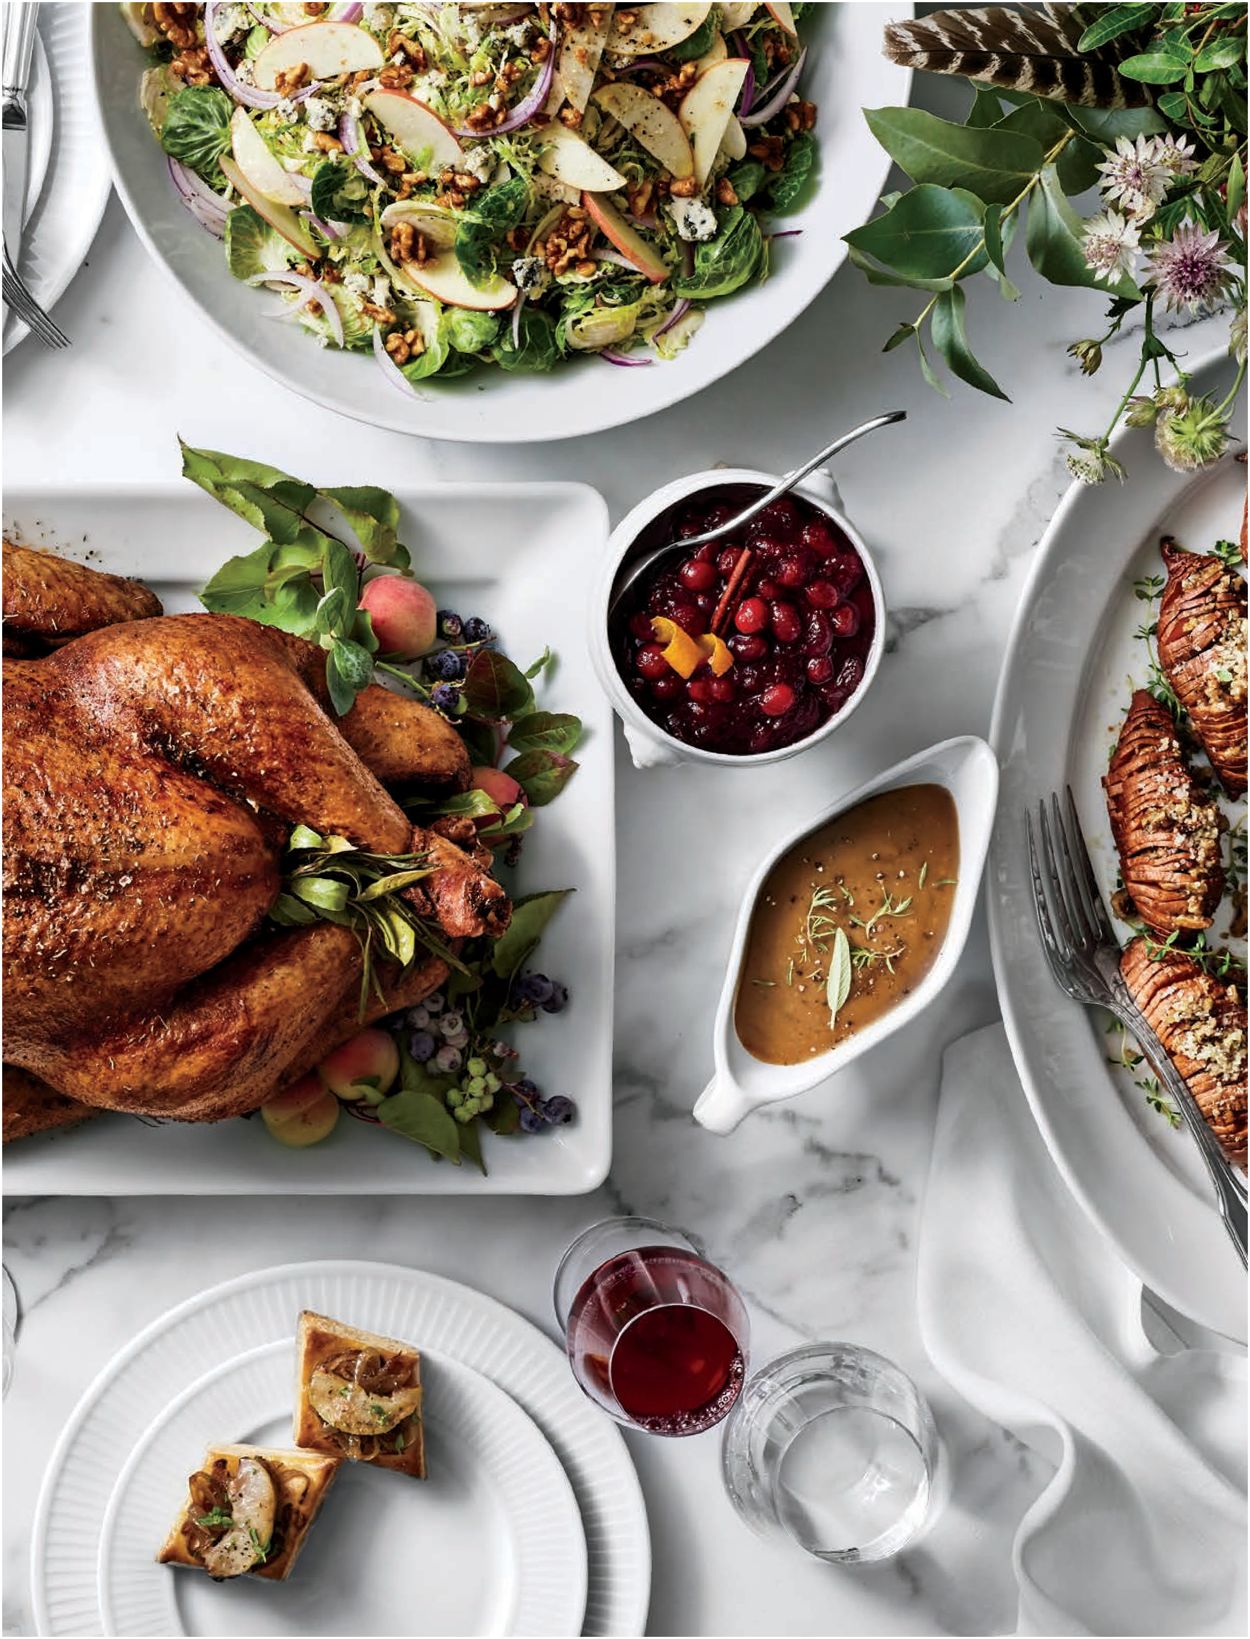 Williams-Sonoma Ad from 10/01/2021